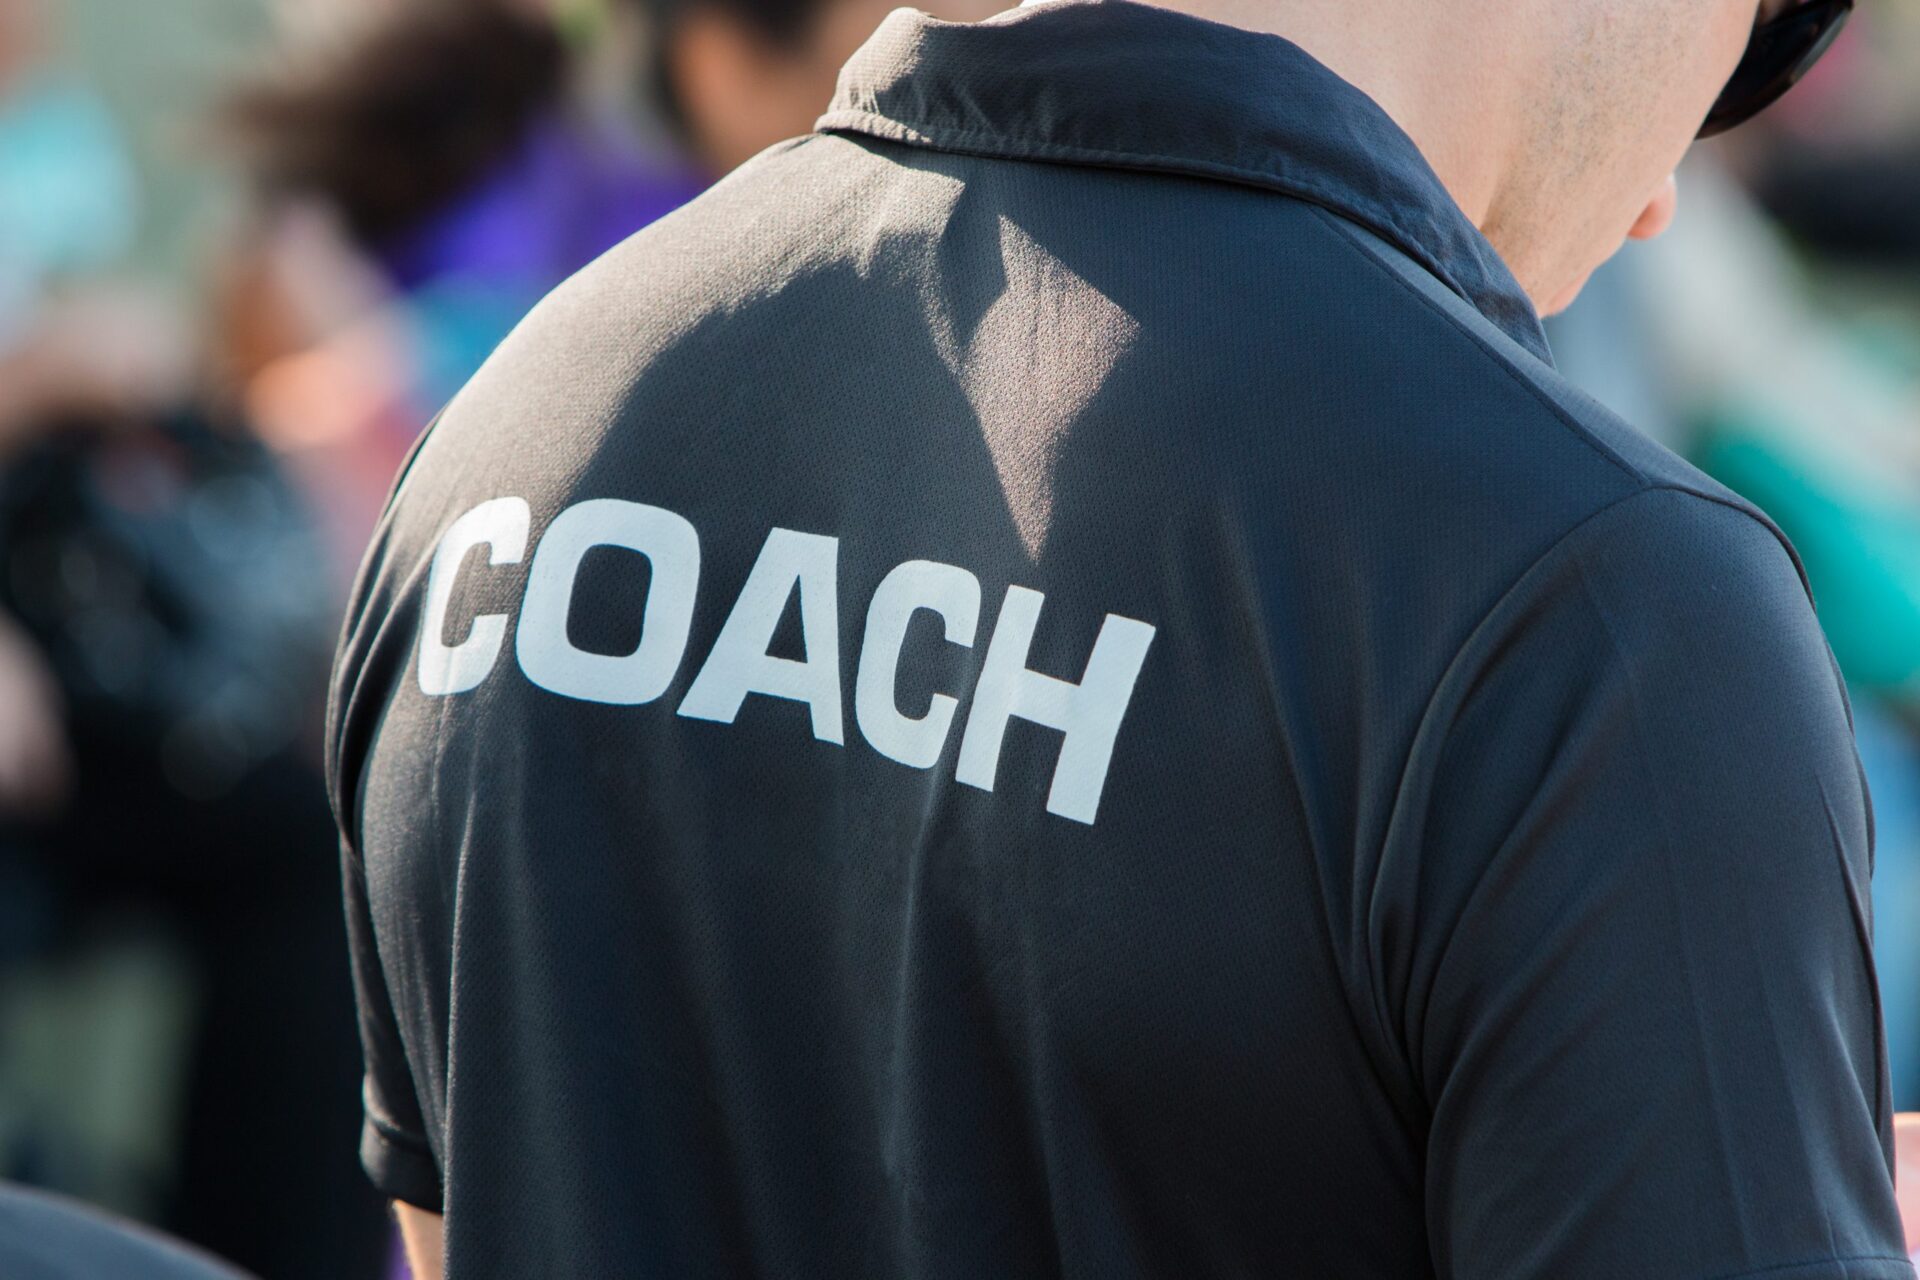 Photo of someone wearing a shirt that says 'coach' on the back